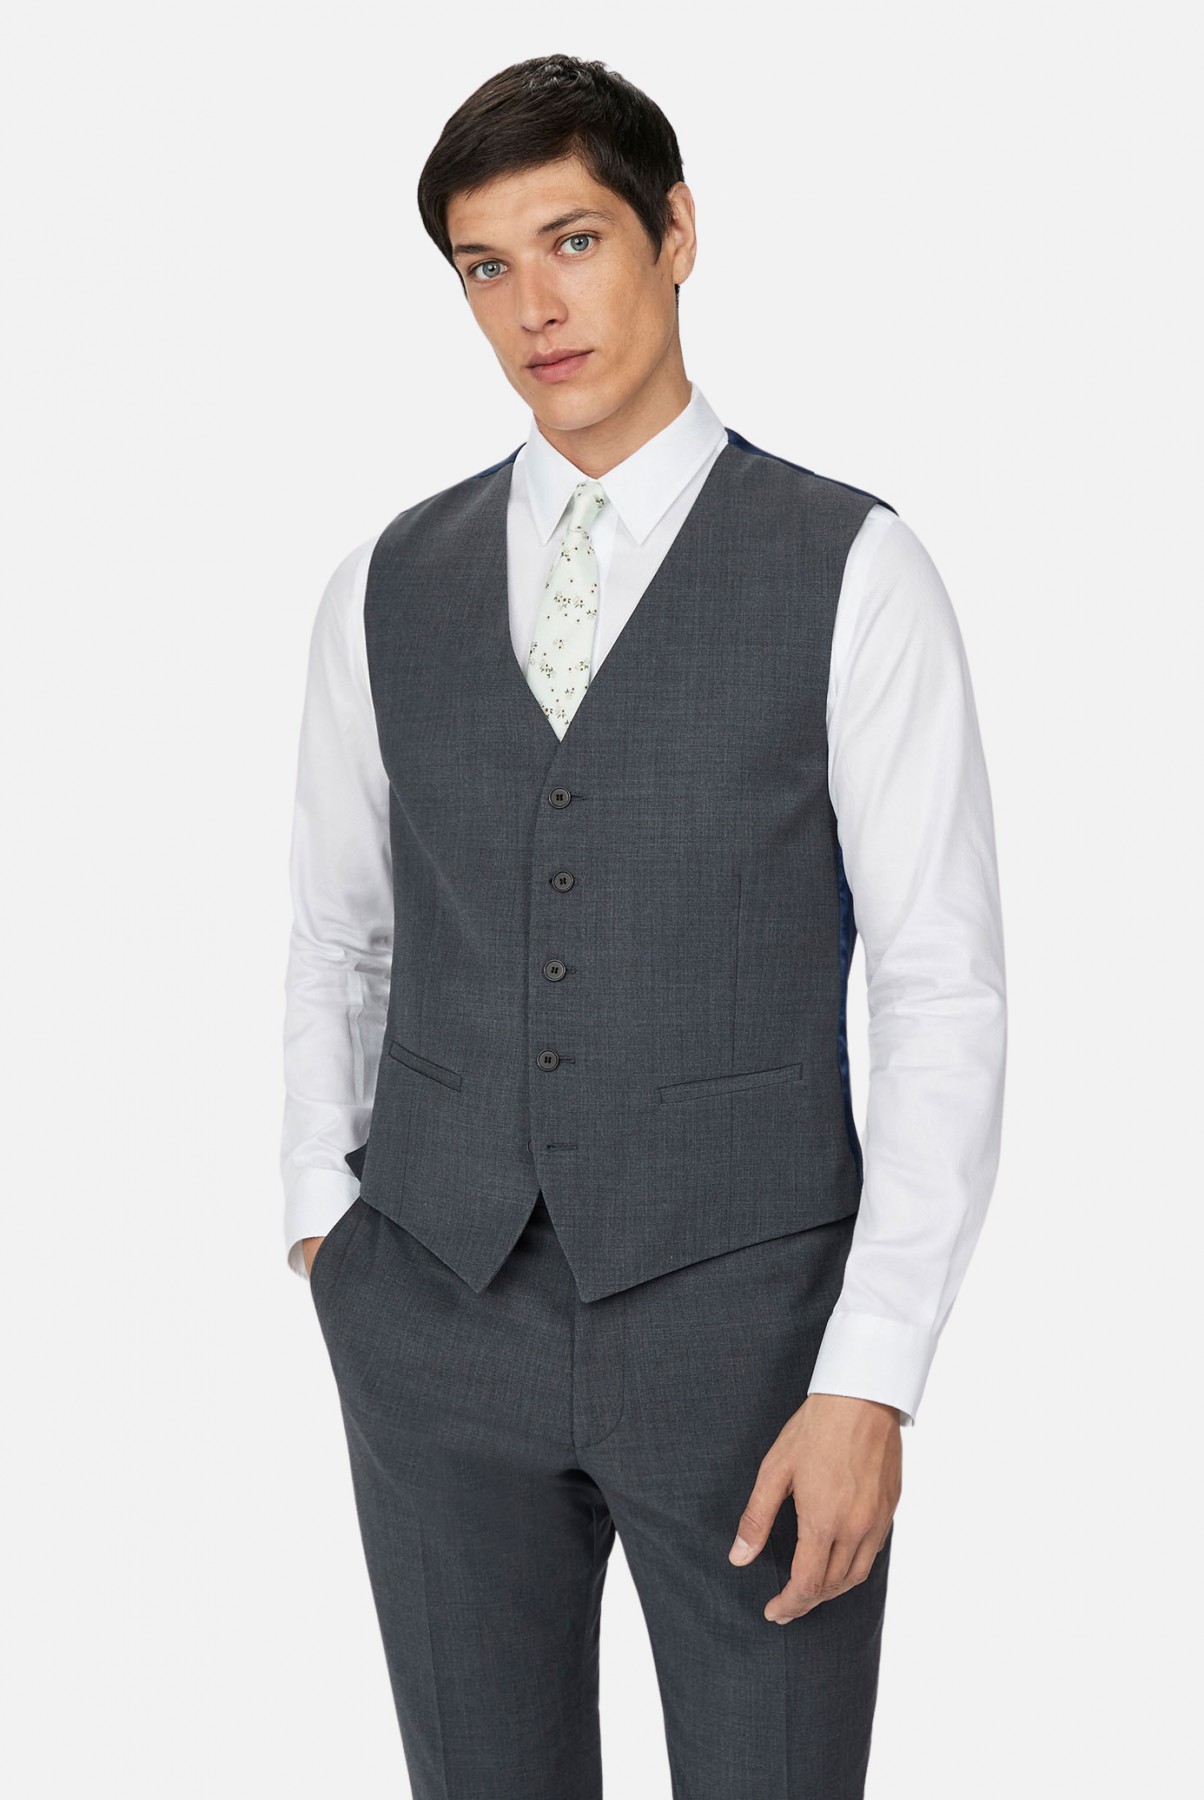 Ted Baker SLIM Suit - Charcoal